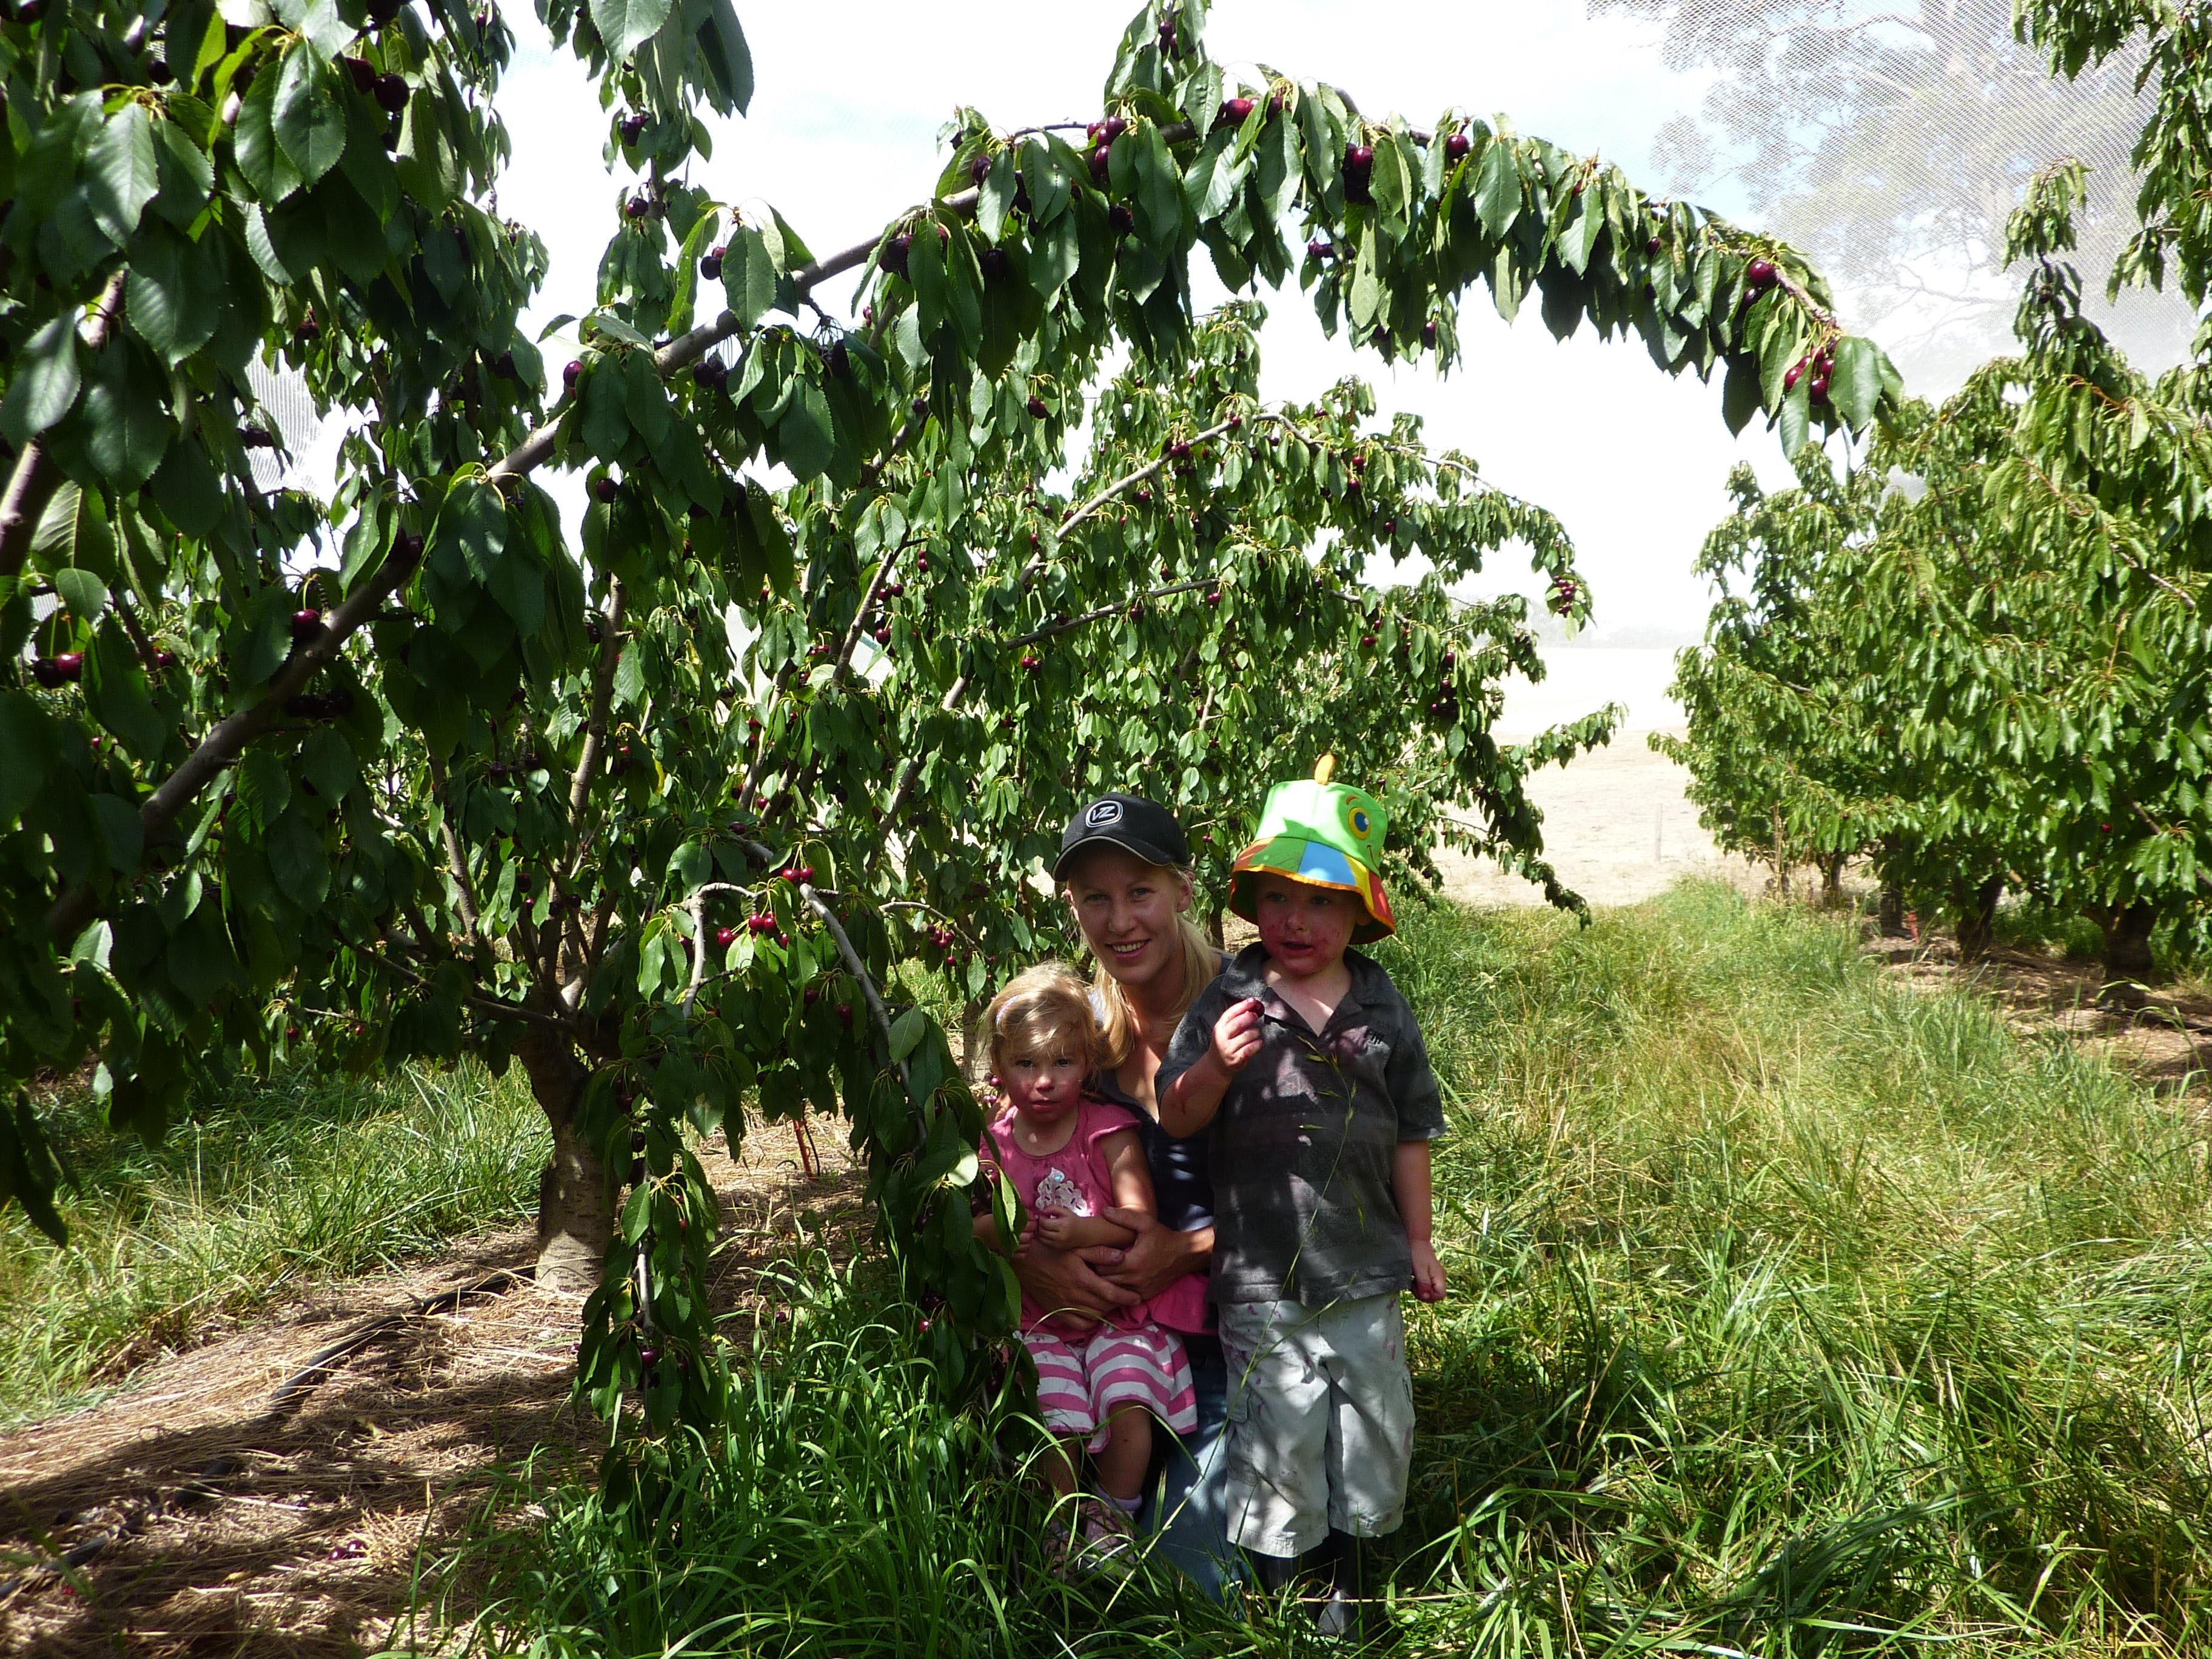 Harben Vale Pick Your Own Cherries - Port Augusta Accommodation